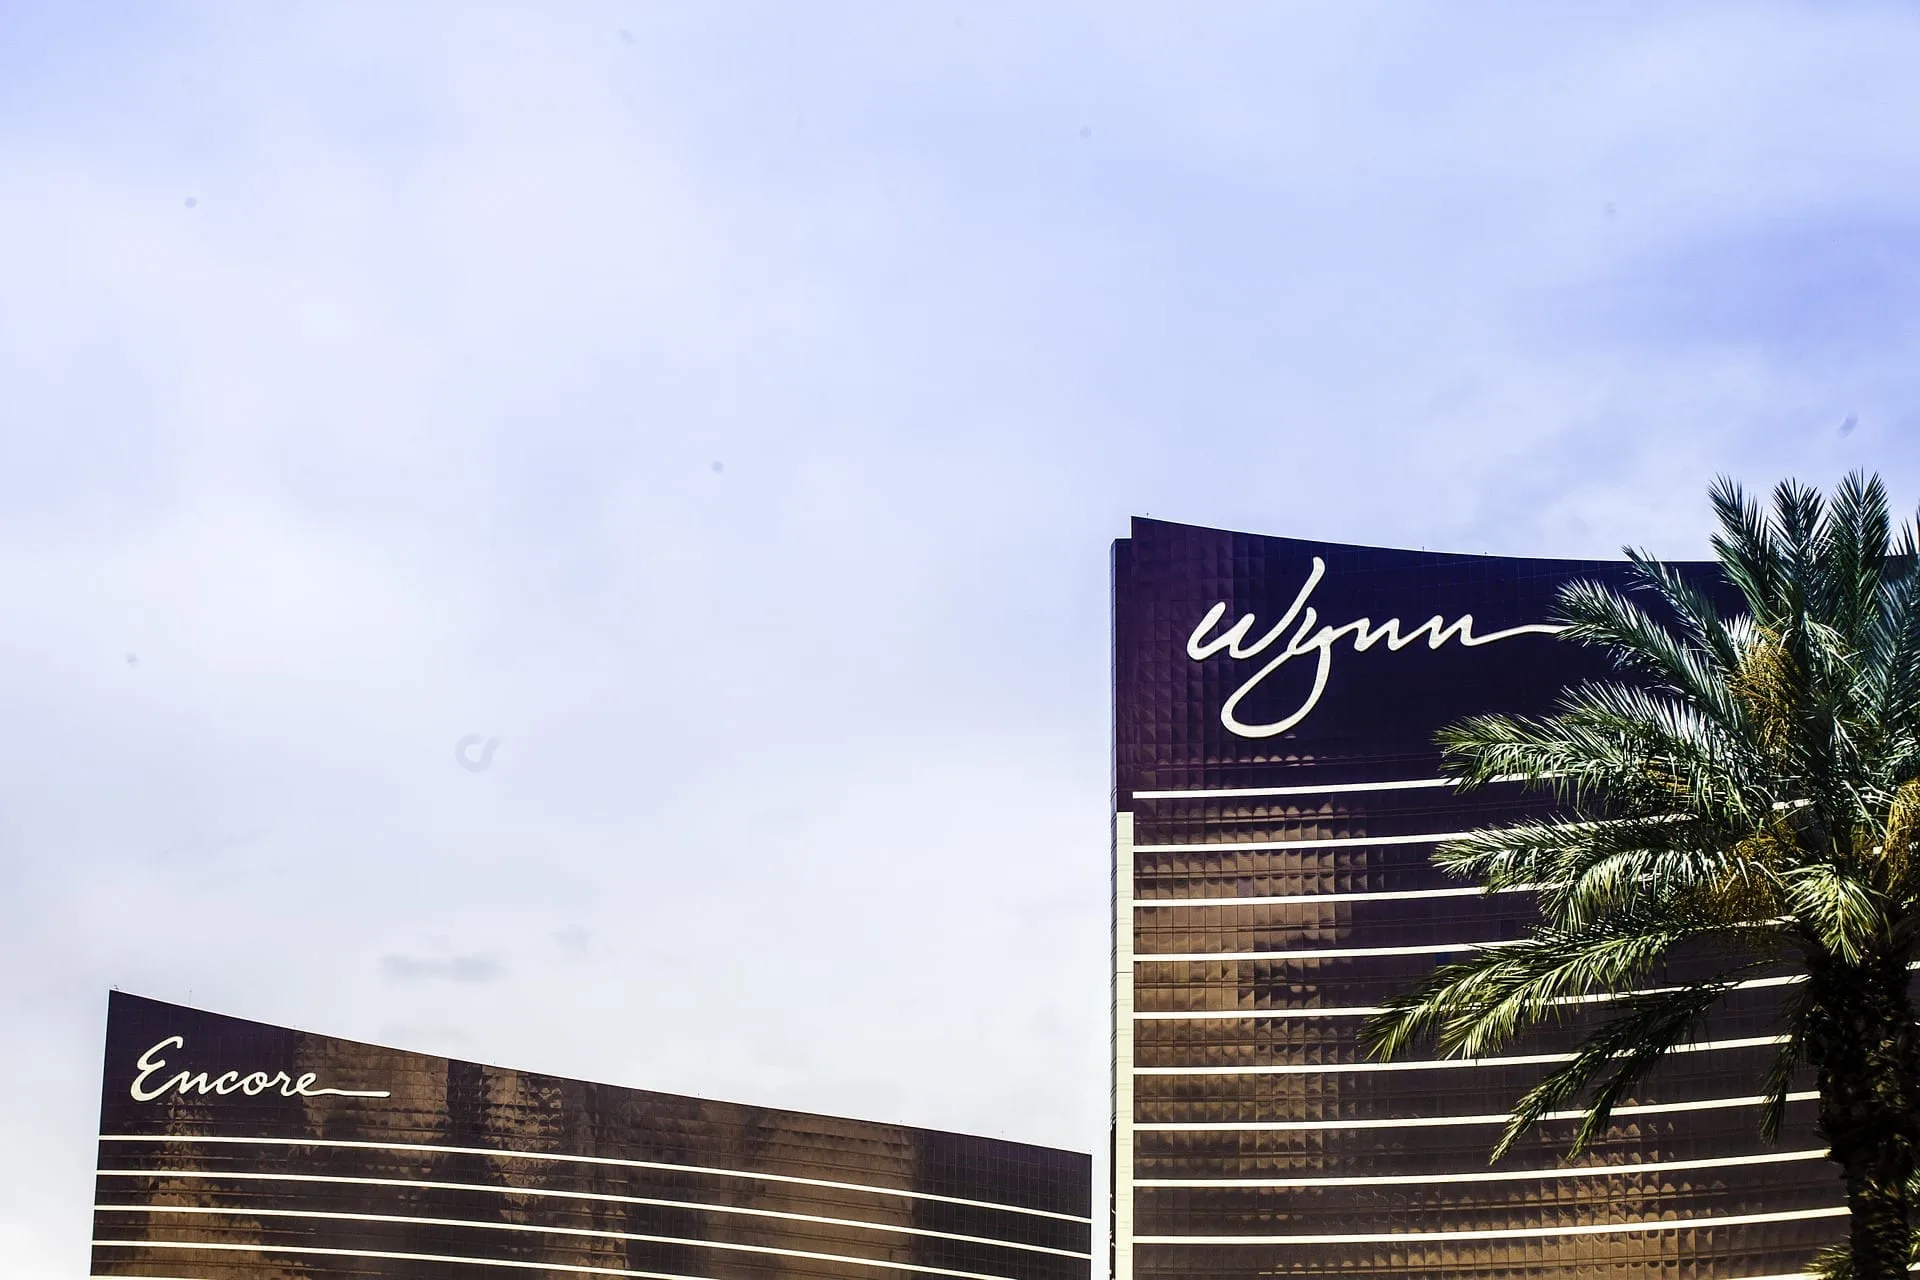 An image of the Wynn Hotel, recommend luxury accommodation on the Las Vegas strip